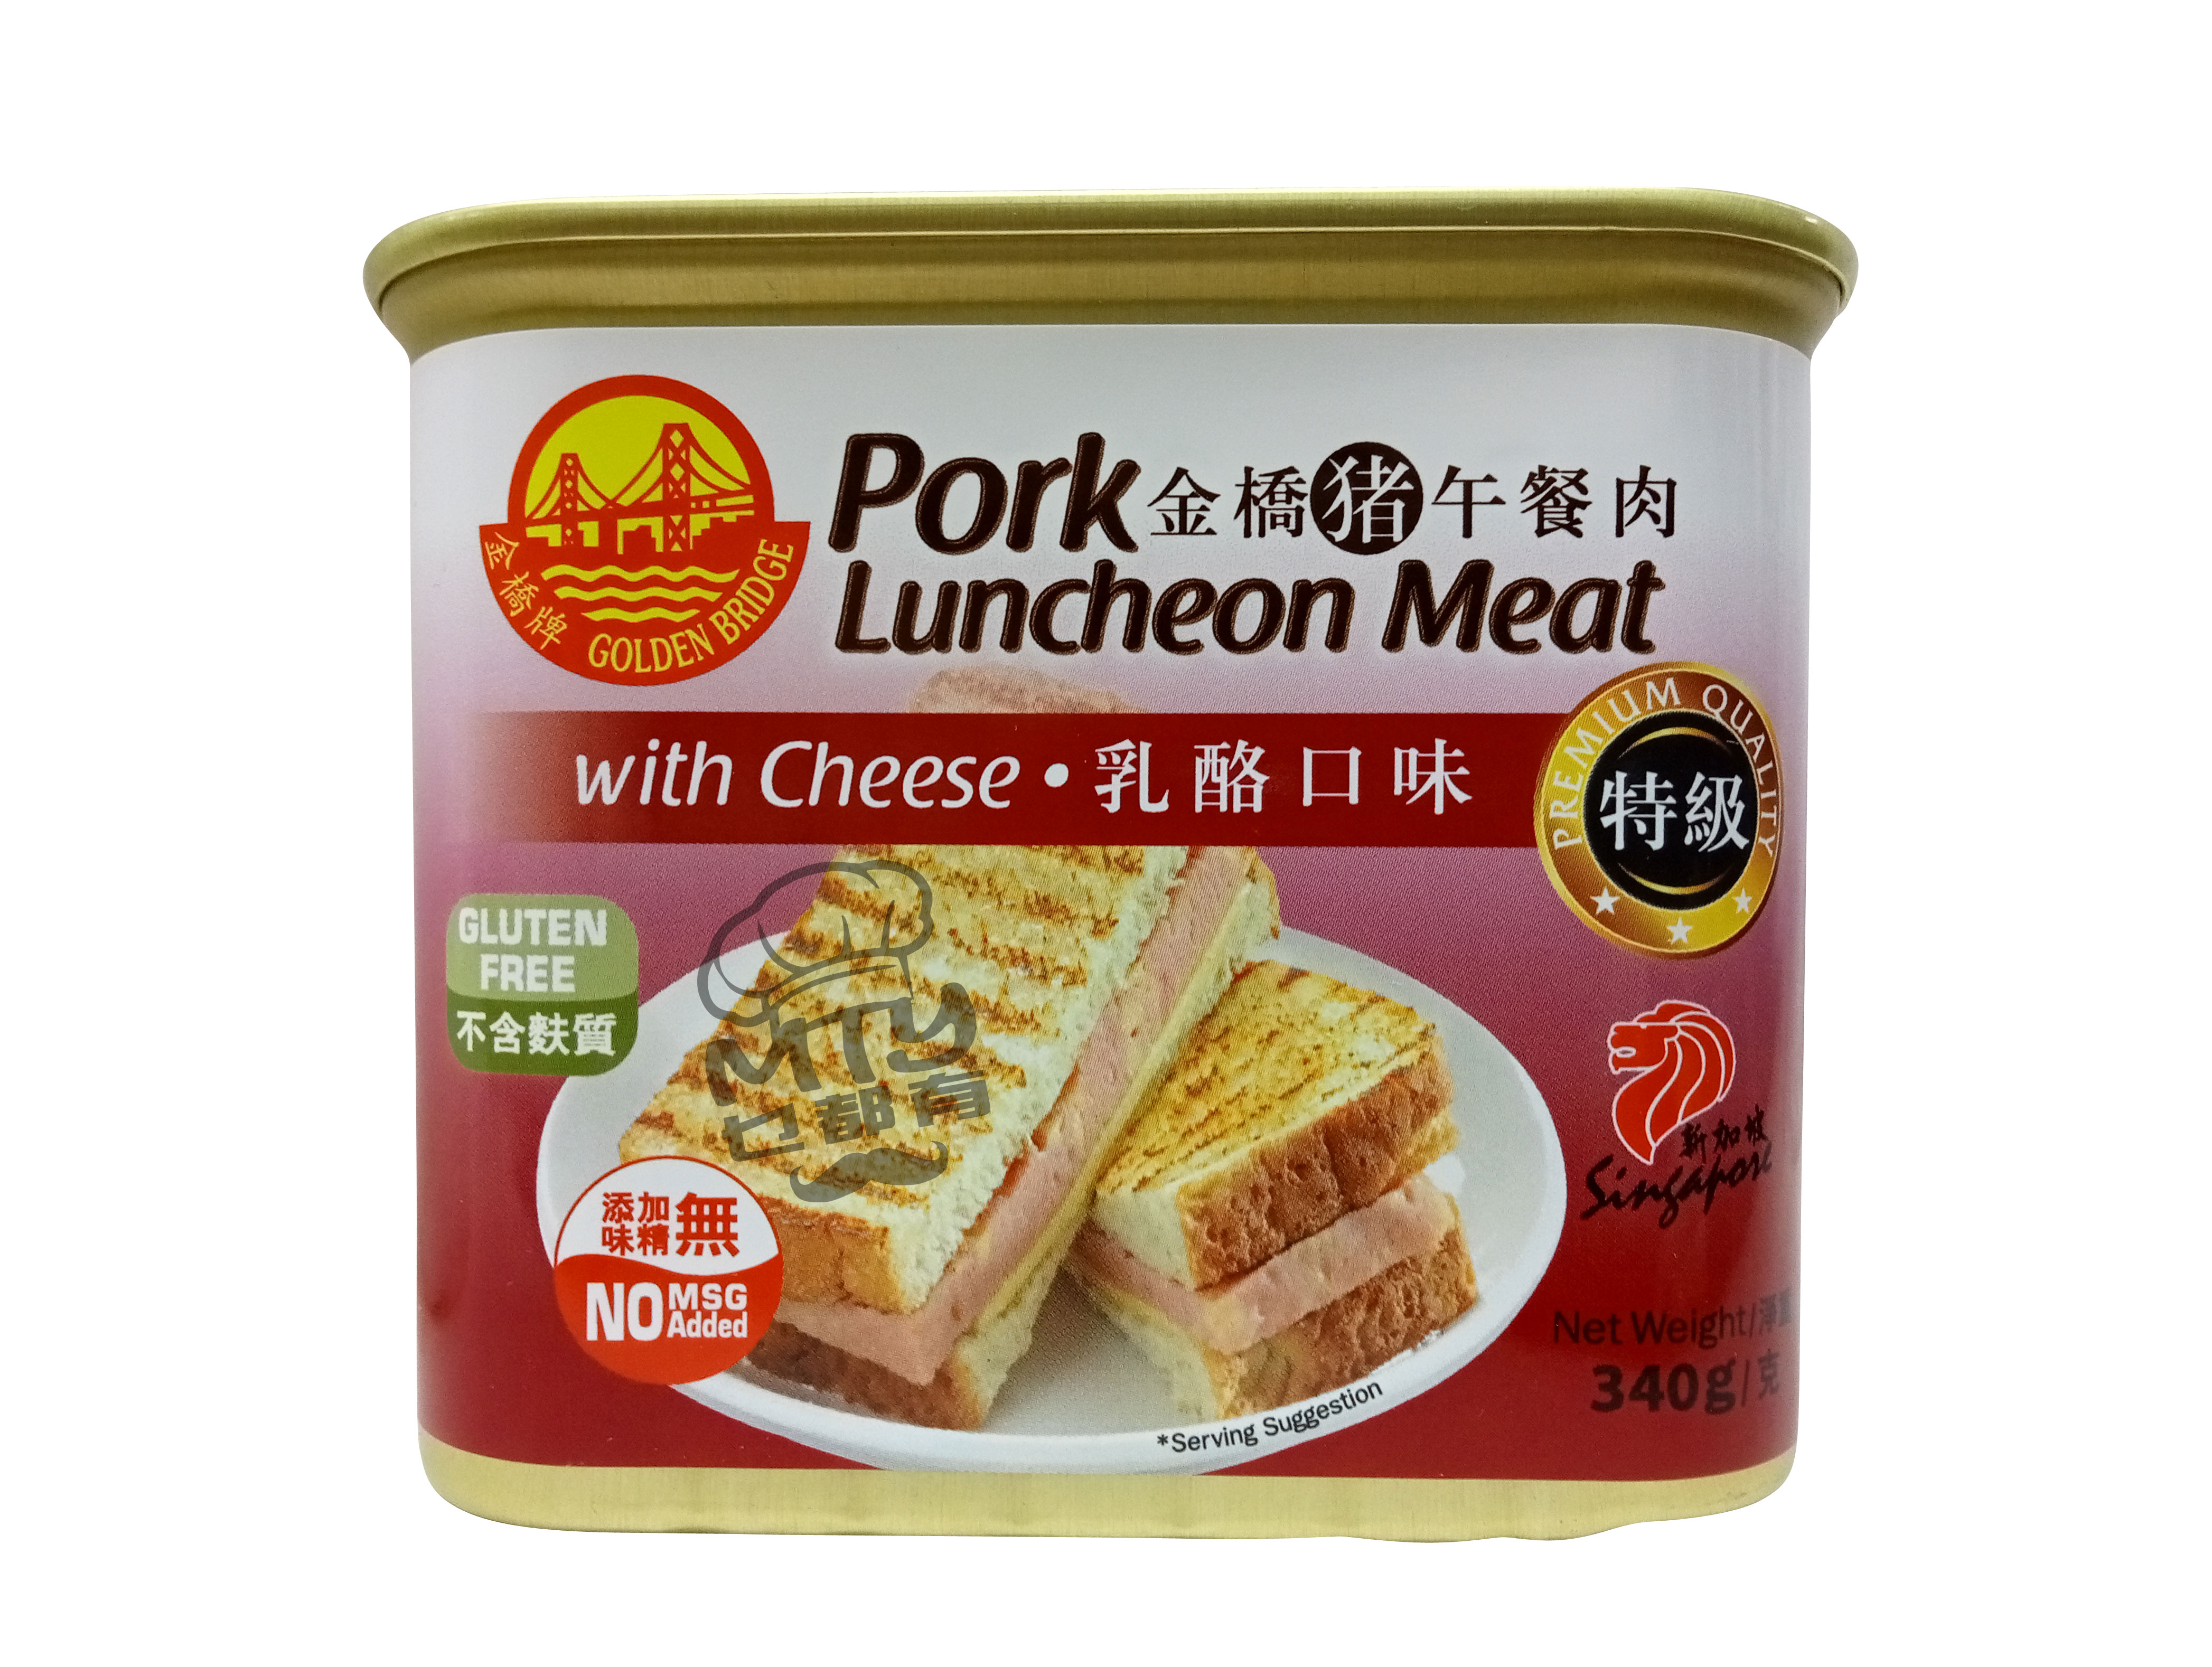 GBP (Cheese) Luncheon Meat 340g